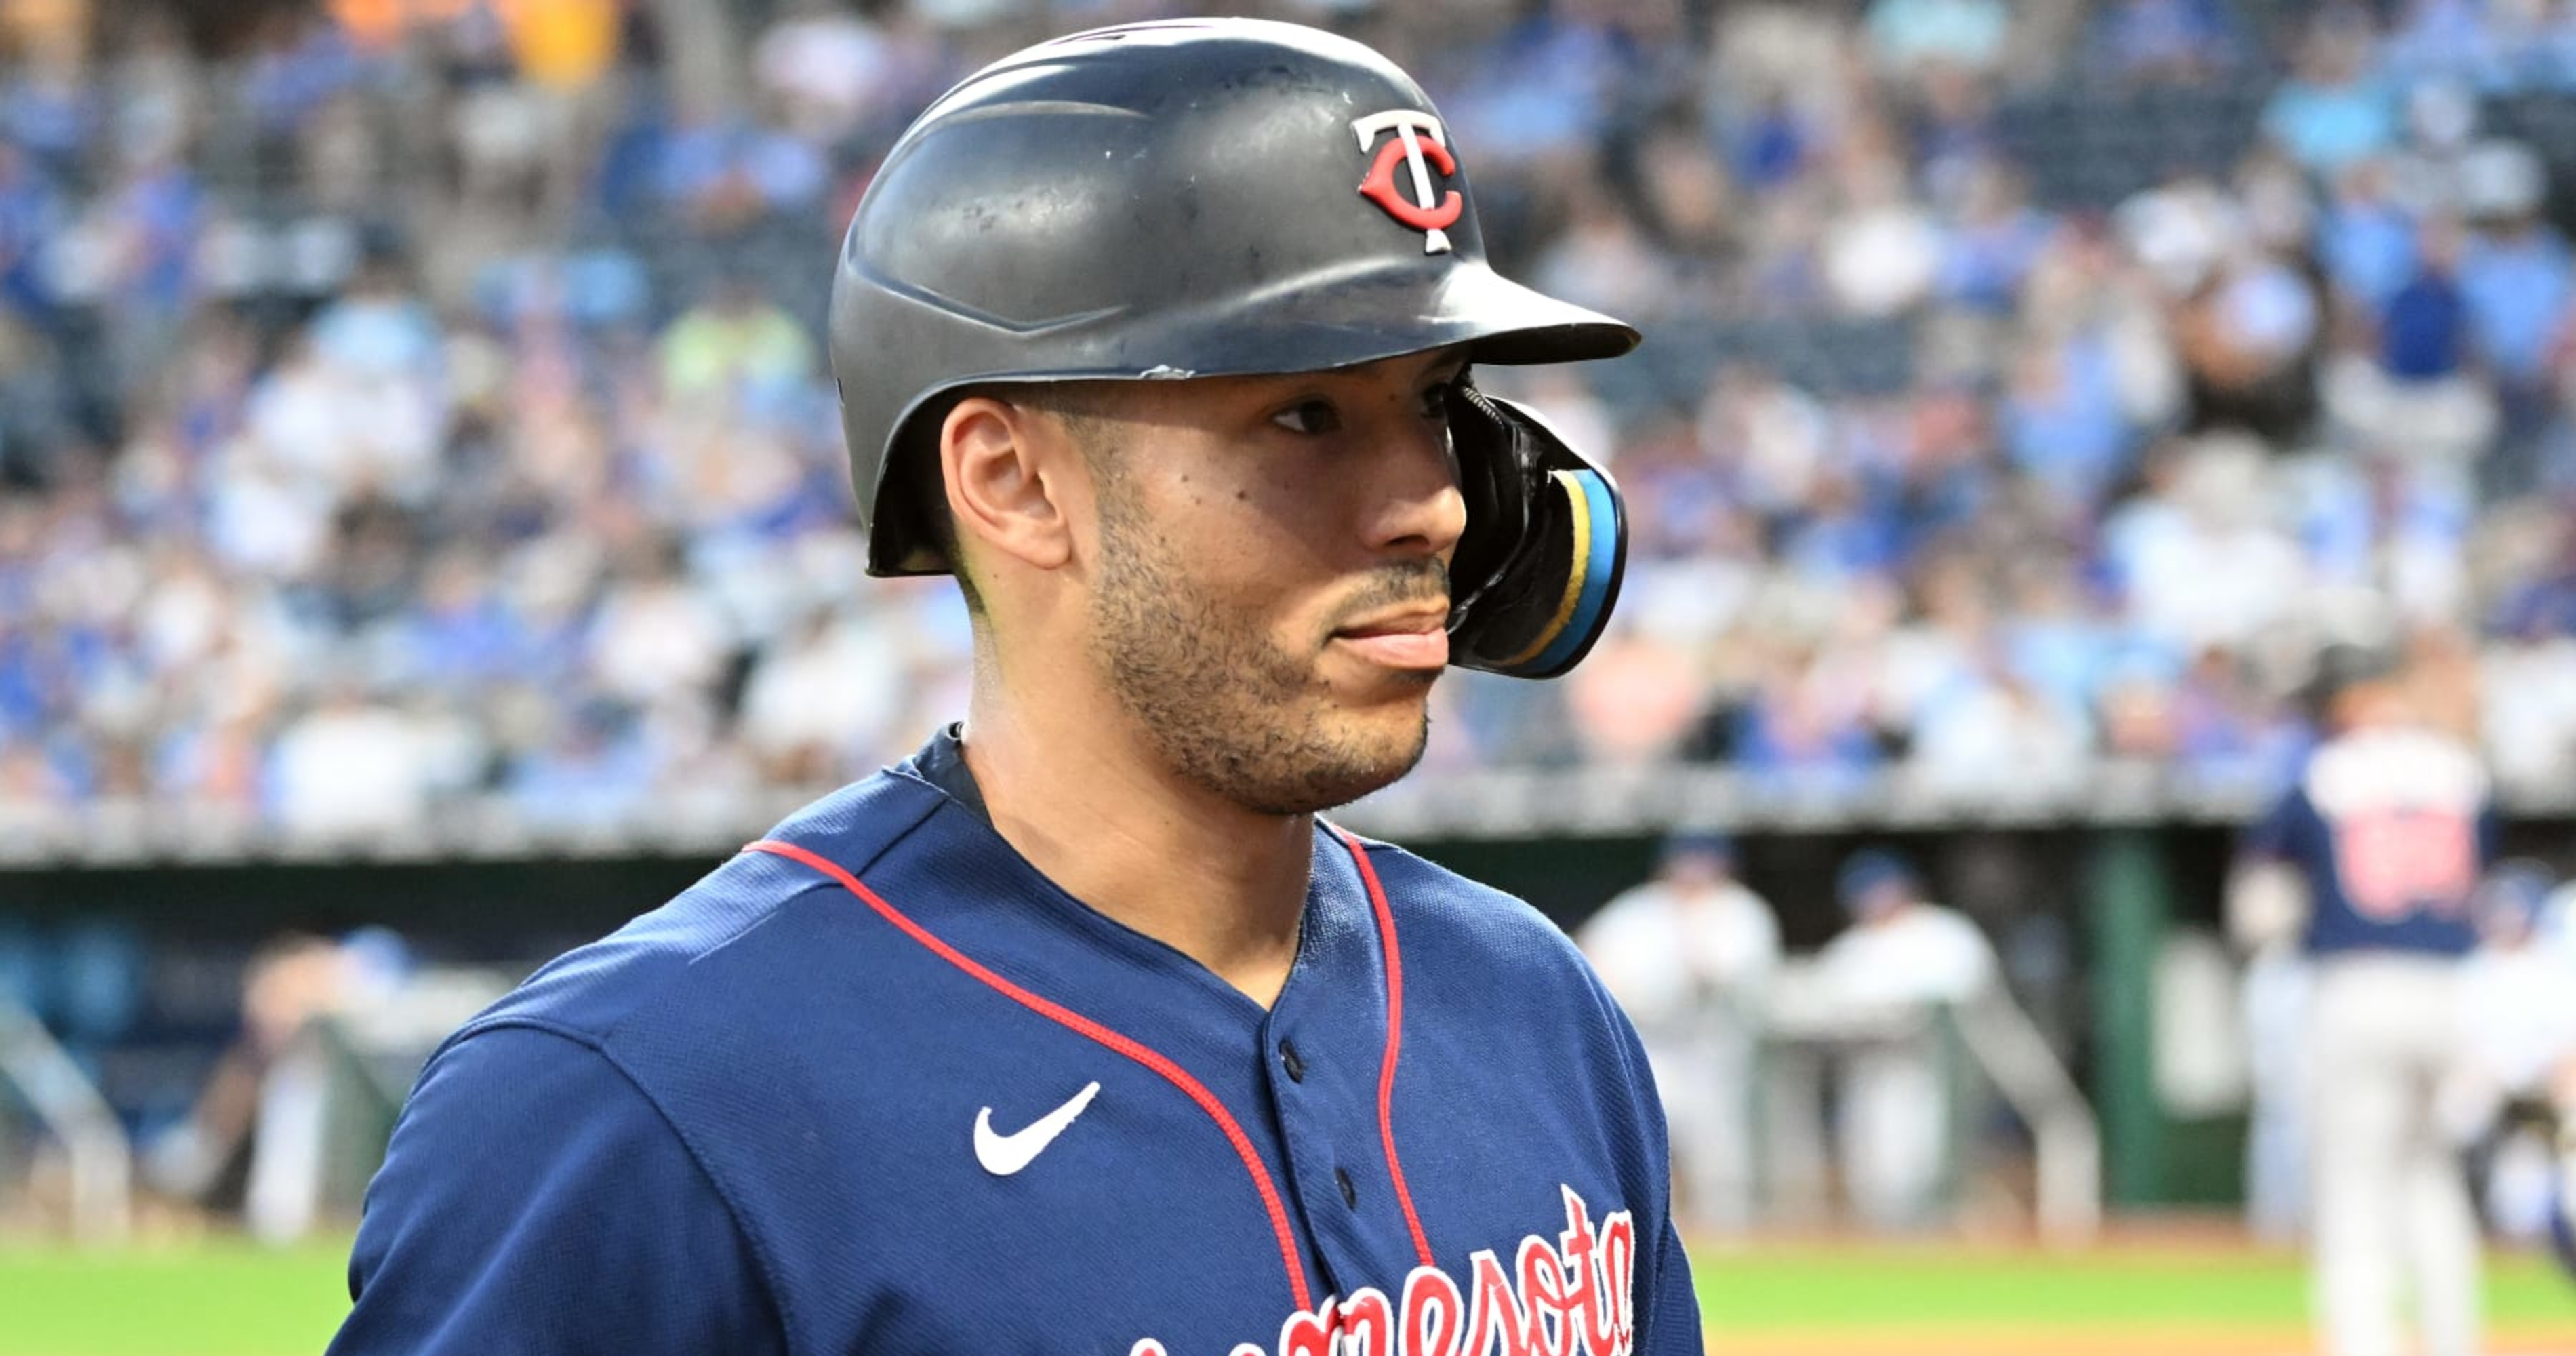 theScore on X: VIDEO: After some heated moments, Carlos Correa's